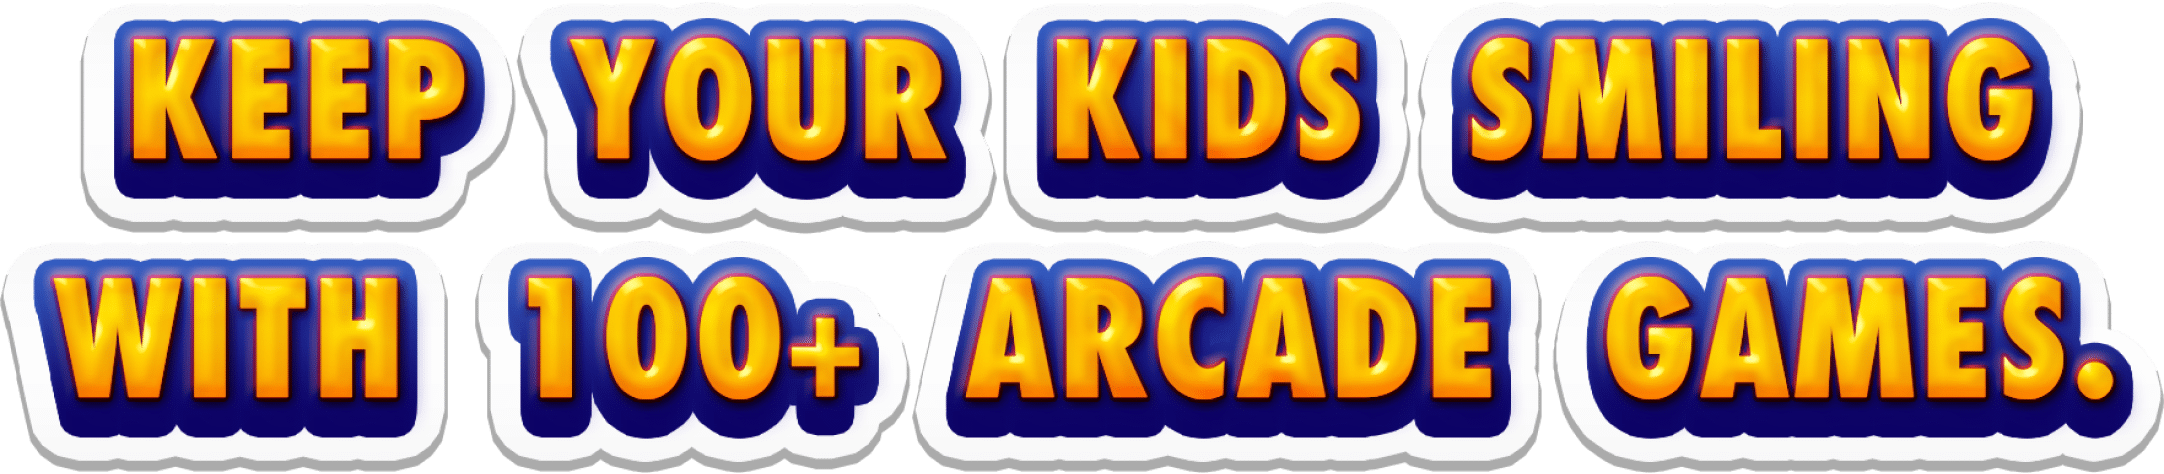 Keep Your Kids Smiling With 100+ Arcade Games.